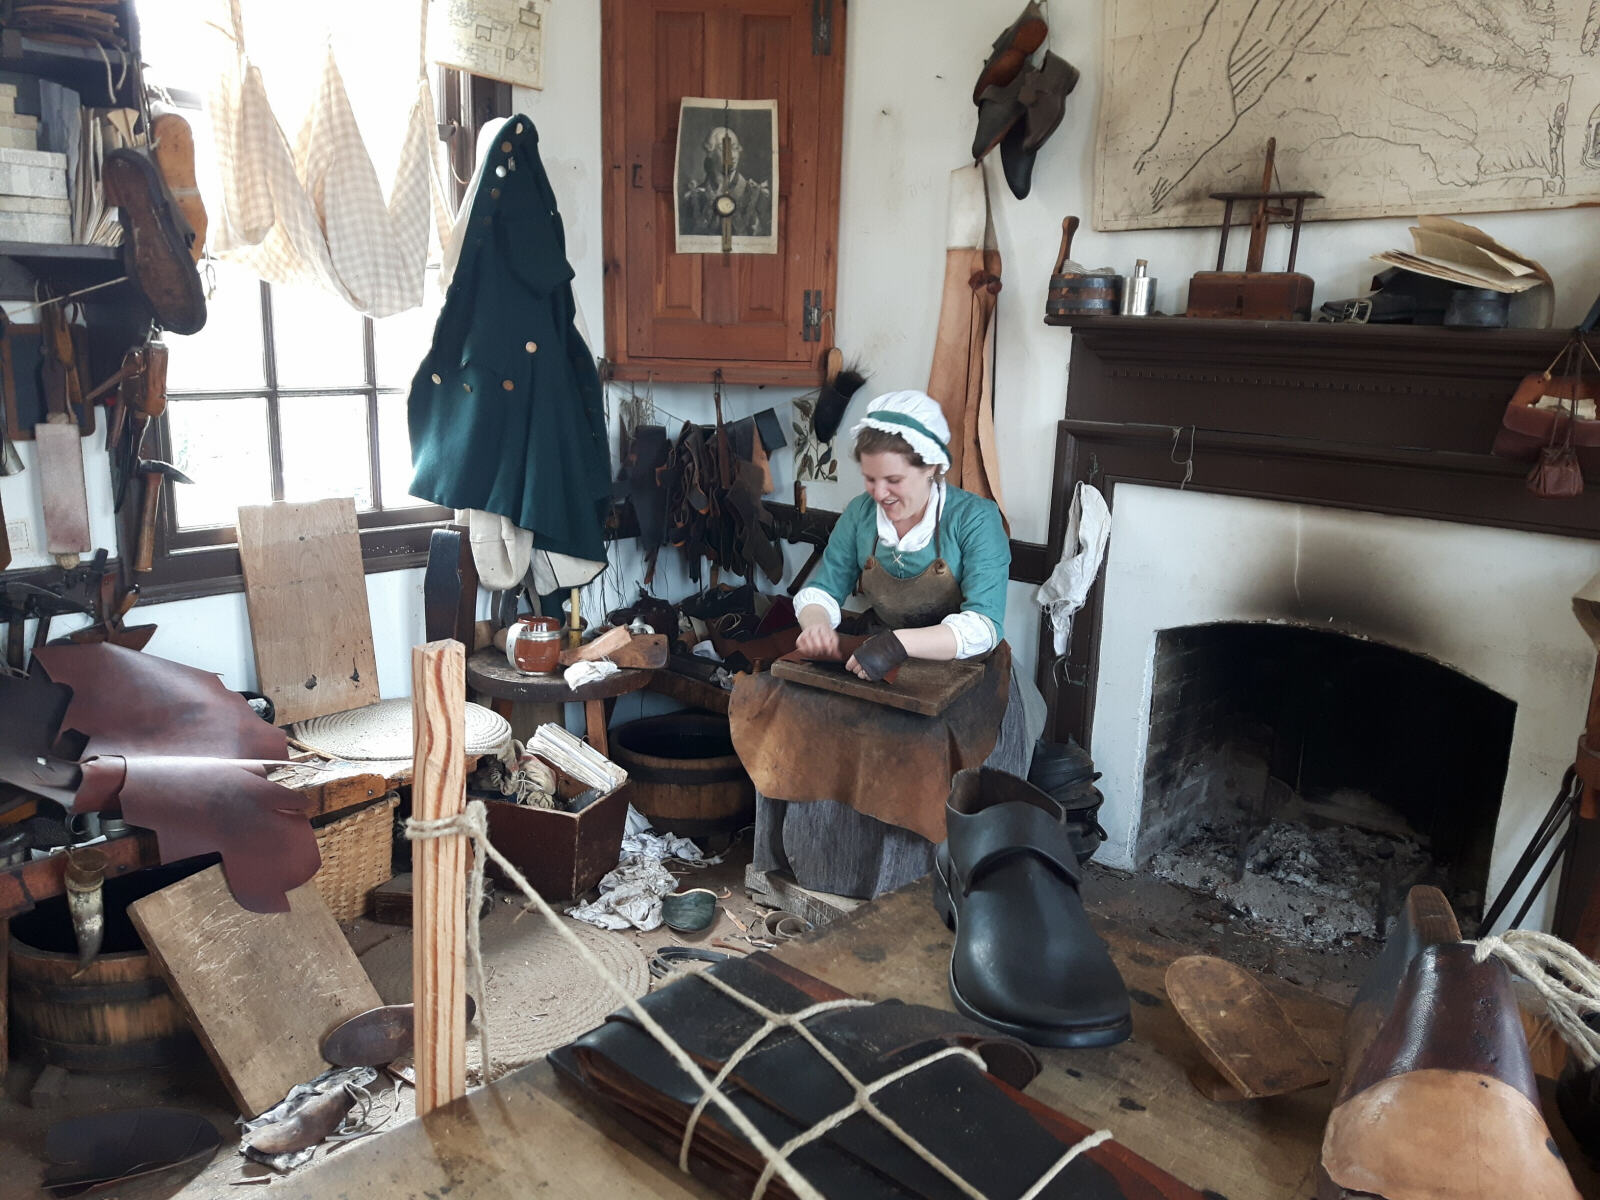 The shoemaker in Colonial Williamsburg, Virginia